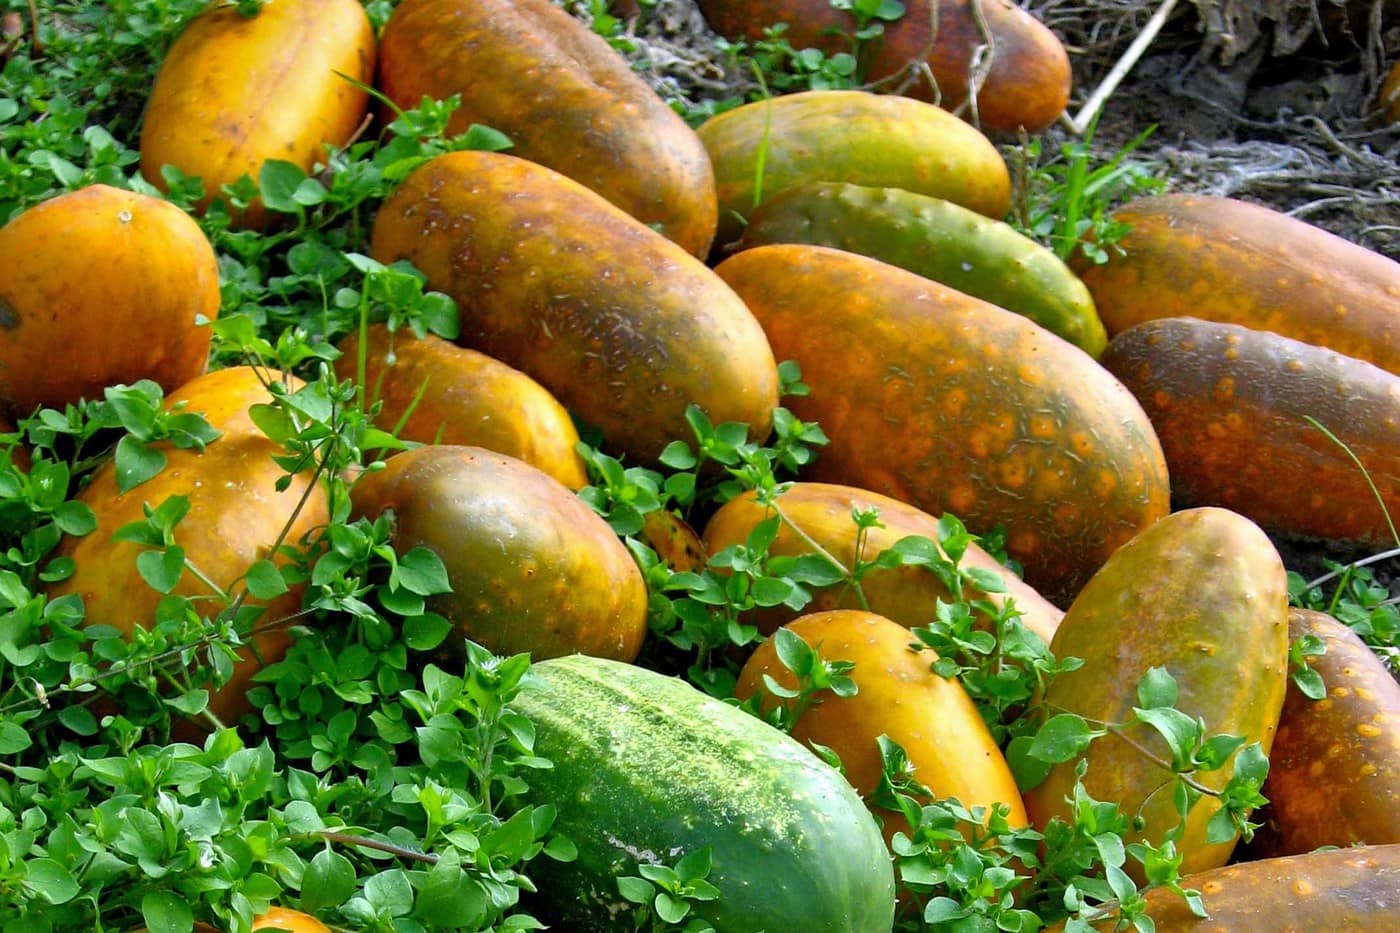 A pile of red Hmong cucumbers with red, orange, or yellow skin.